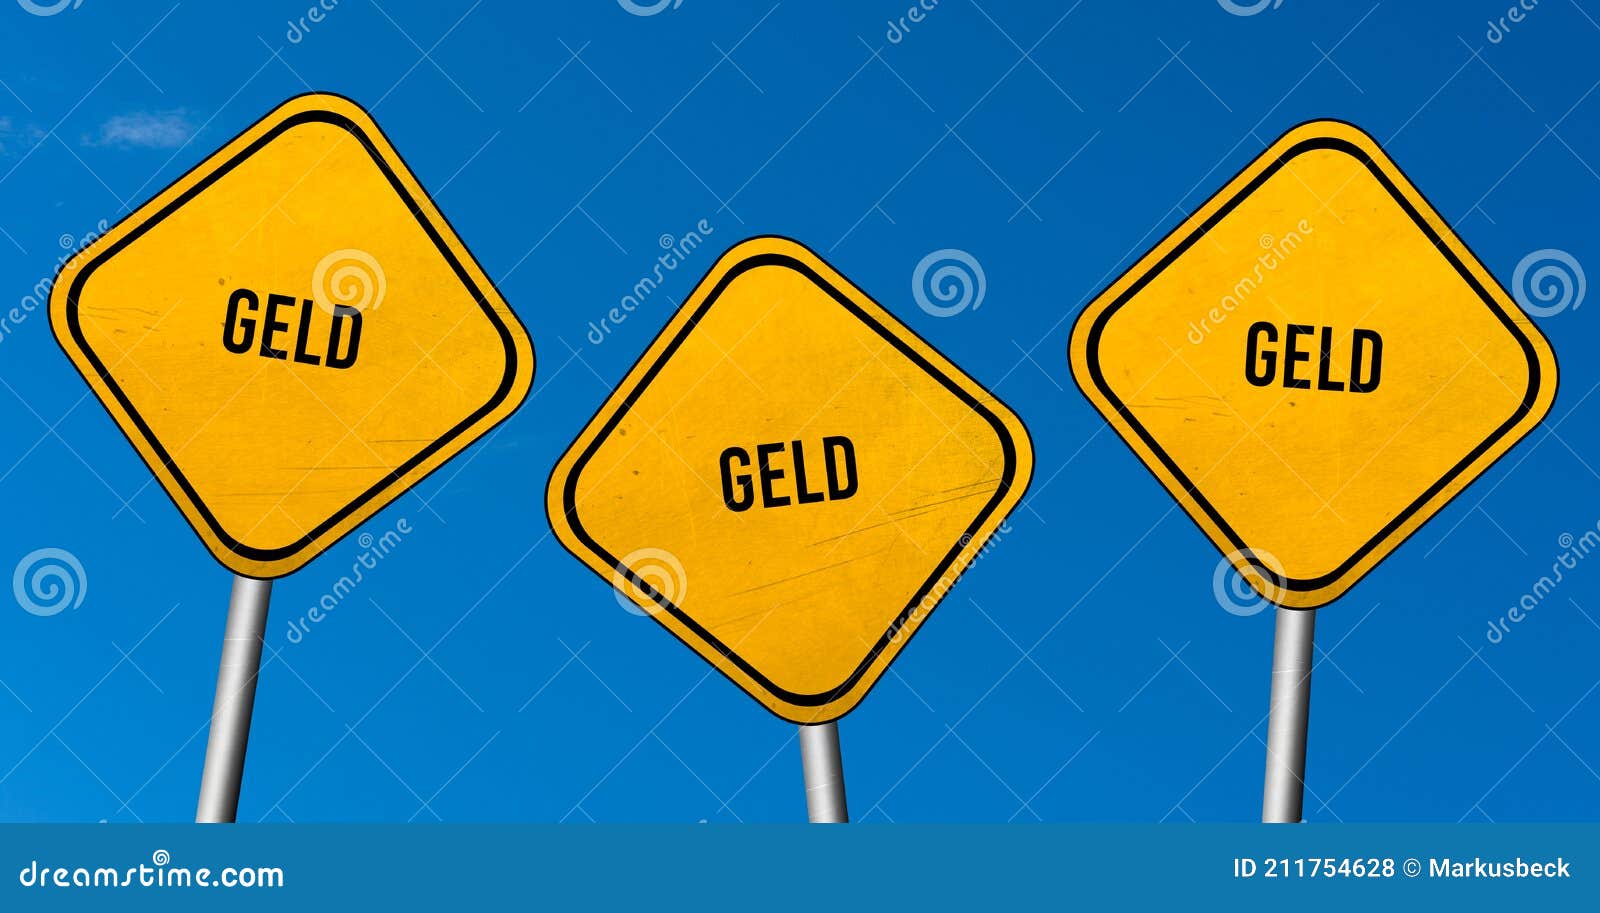 geld - yellow signs with blue sky